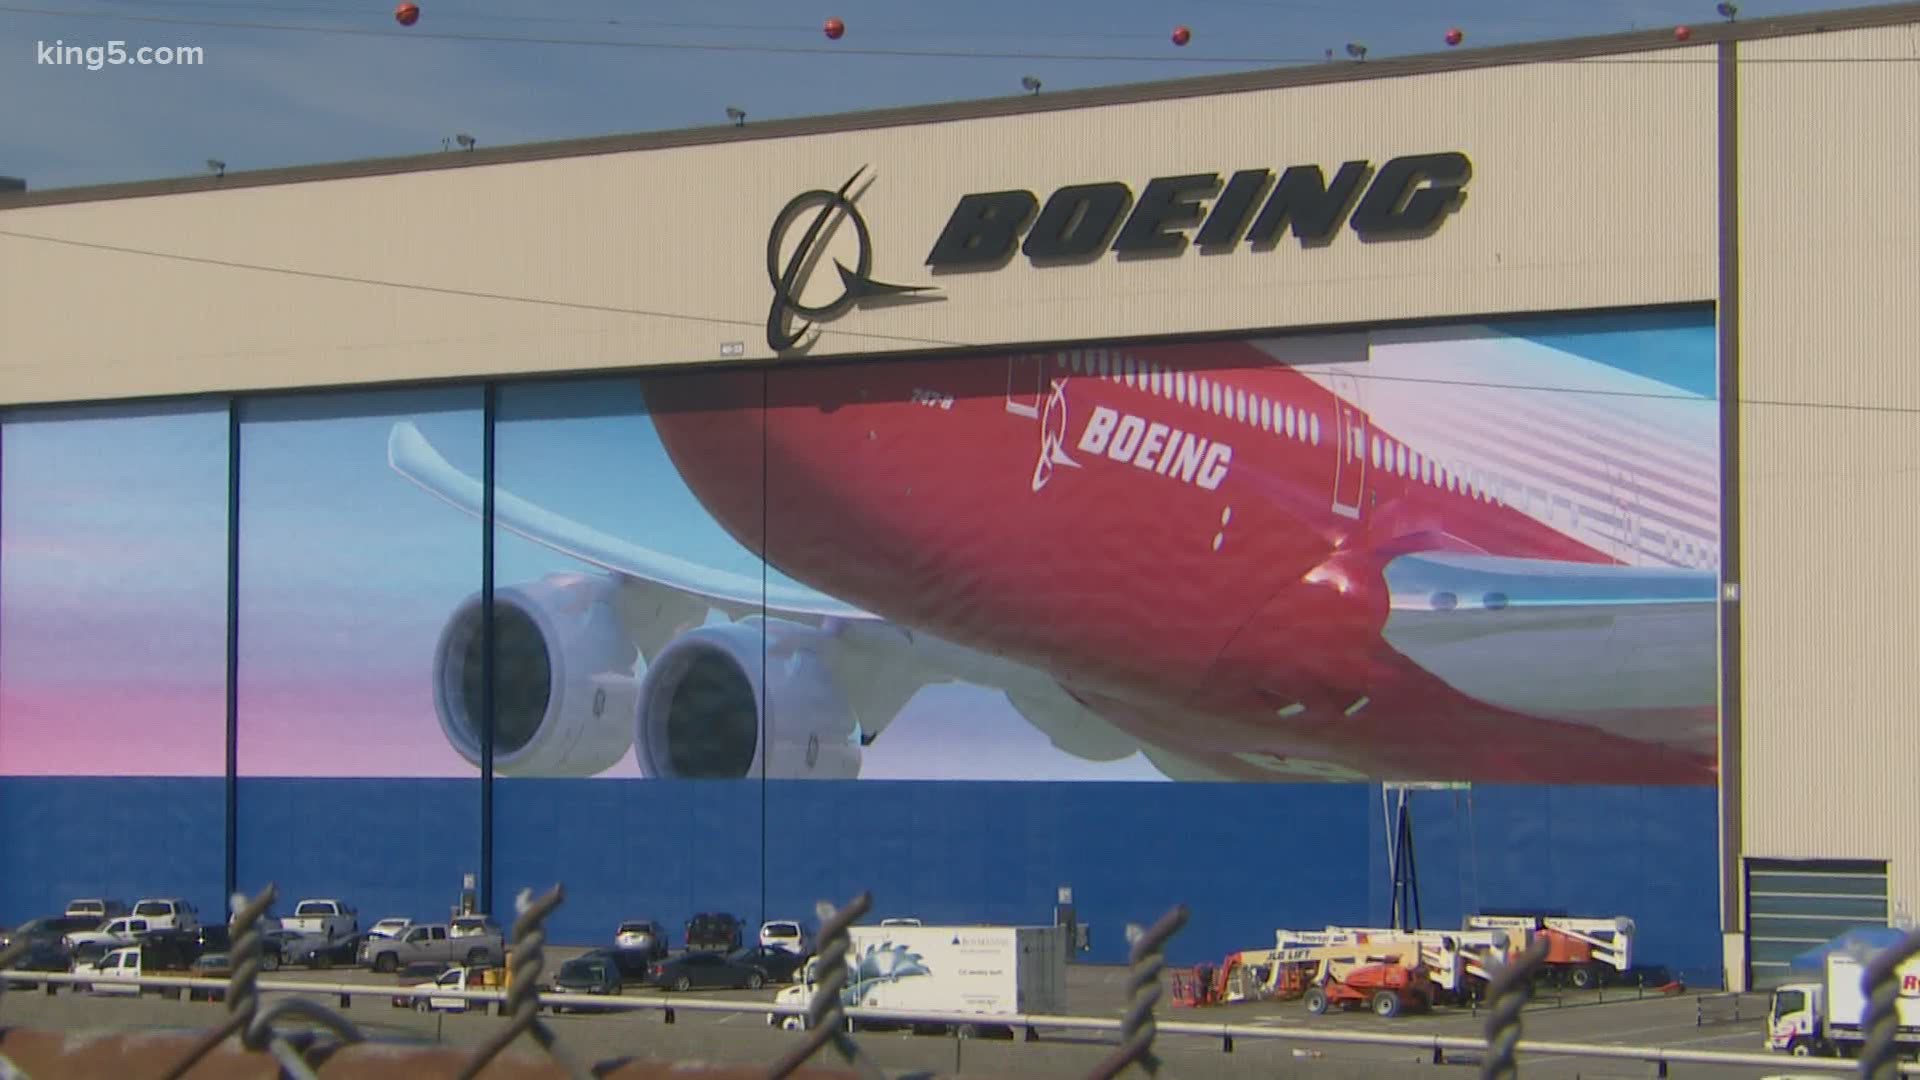 Boeing reported a loss of $641 million for the first quarter of 2020.